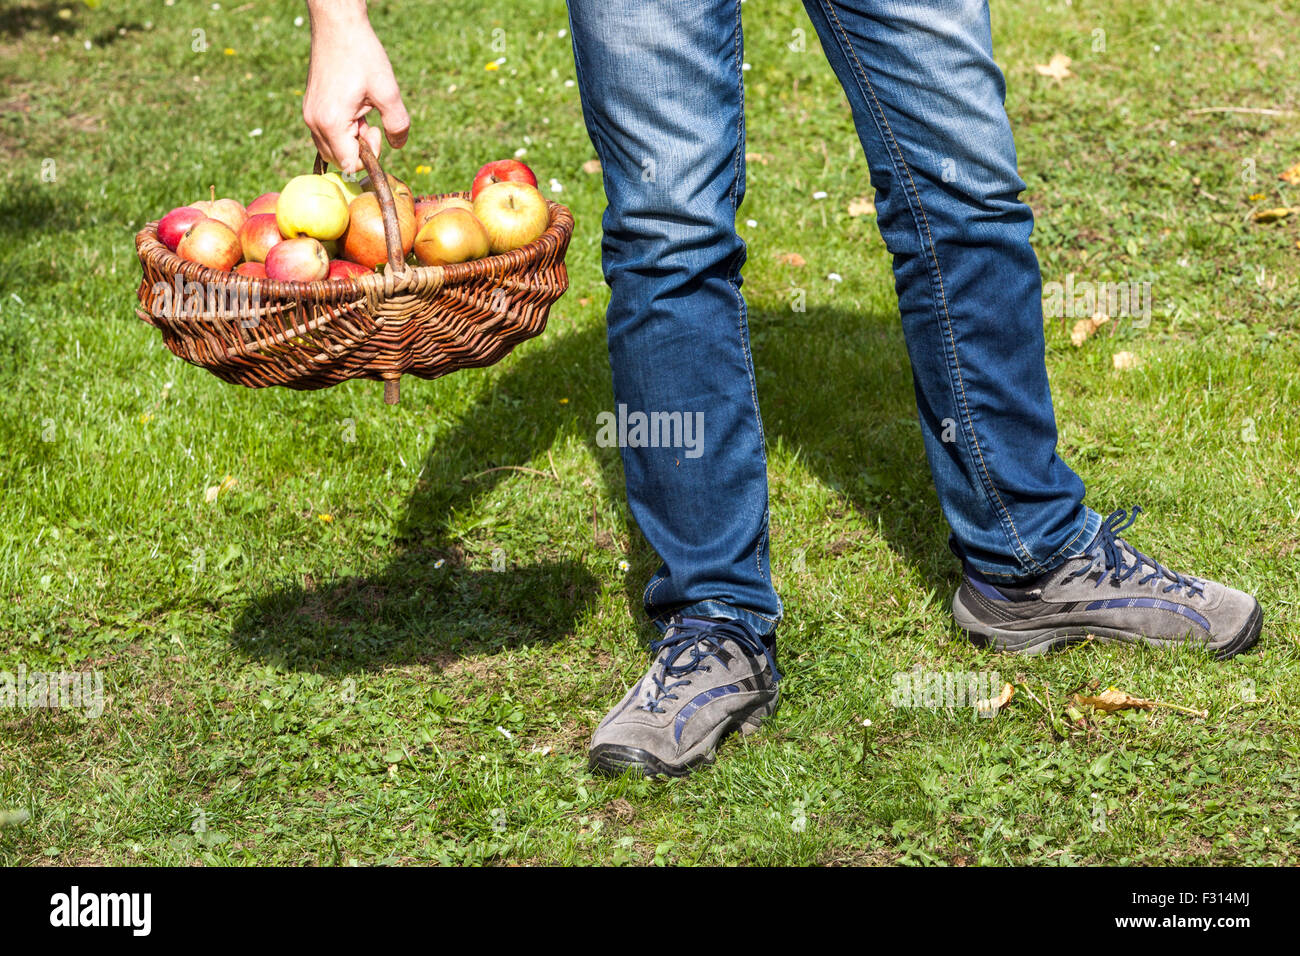 A man carries apples in basket wicker basket autumn harvest picked fruits Stock Photo